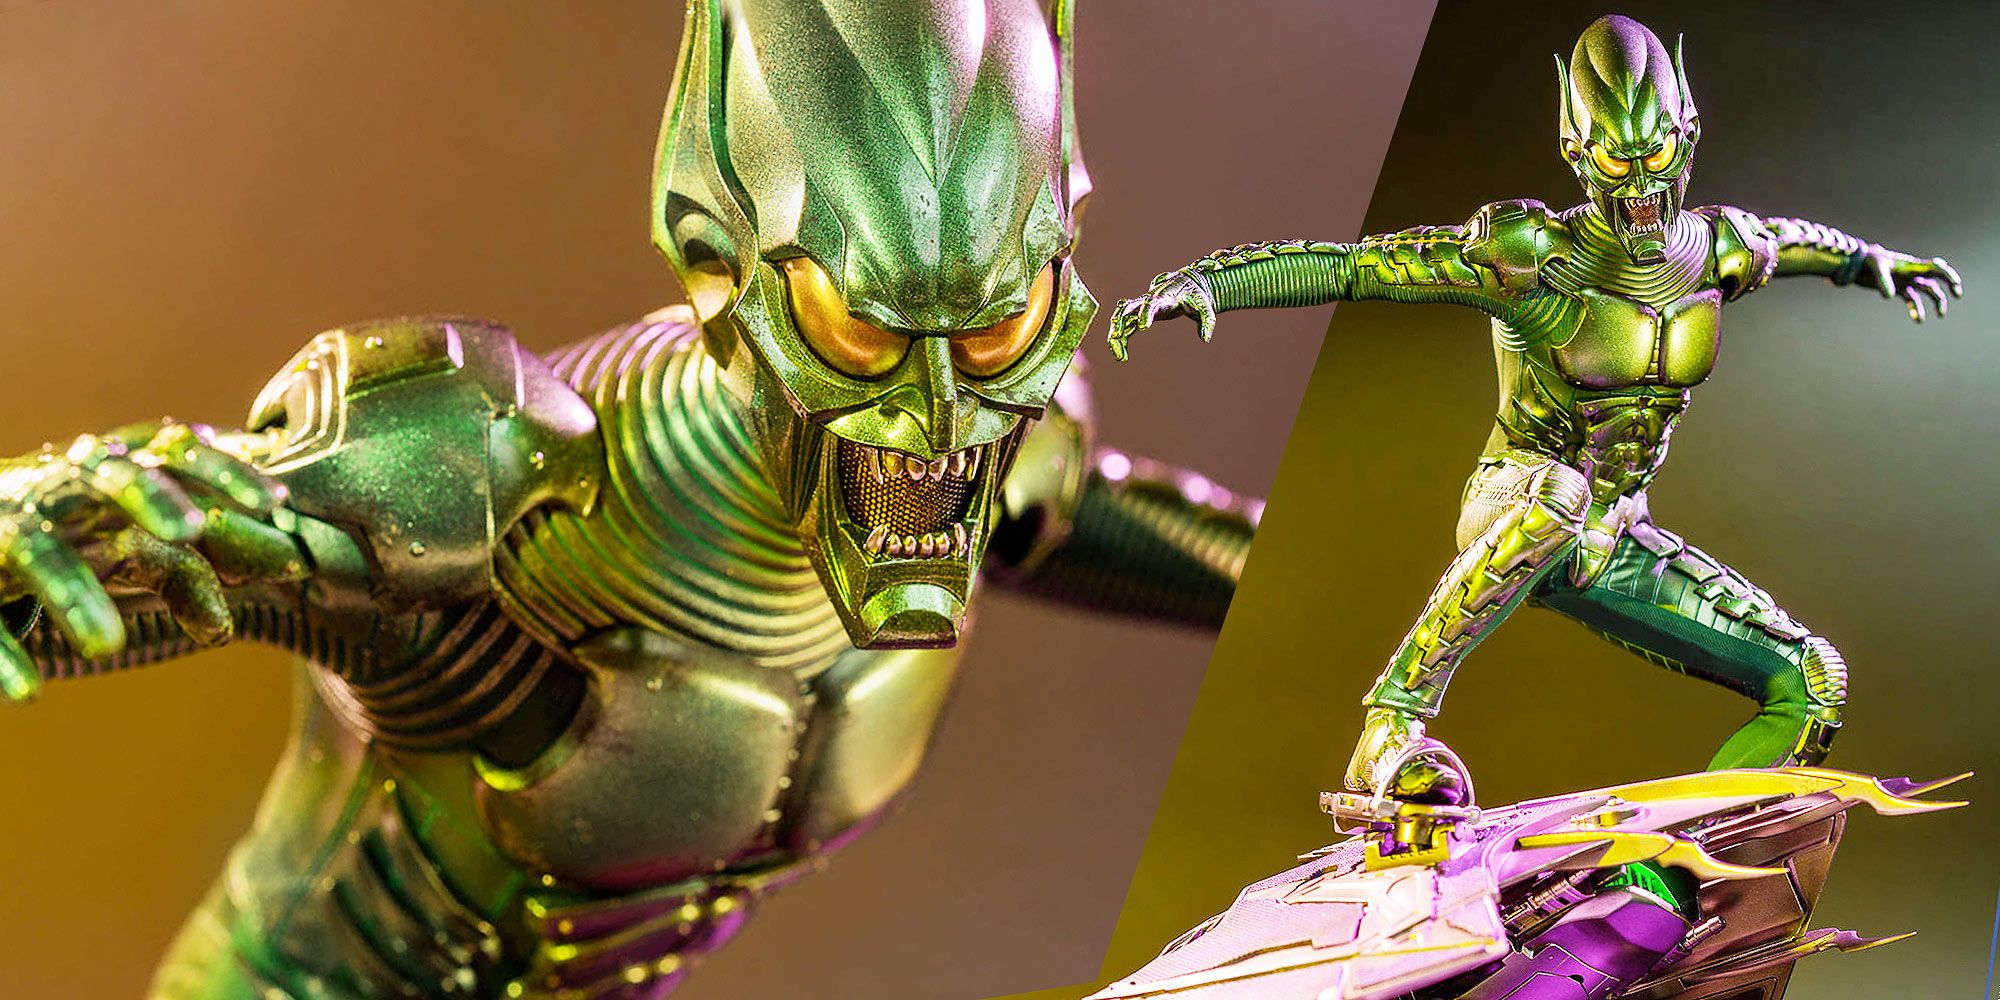 Spider-Man: No Way Home Green Goblin Gets Detailed Hot Toys Figure